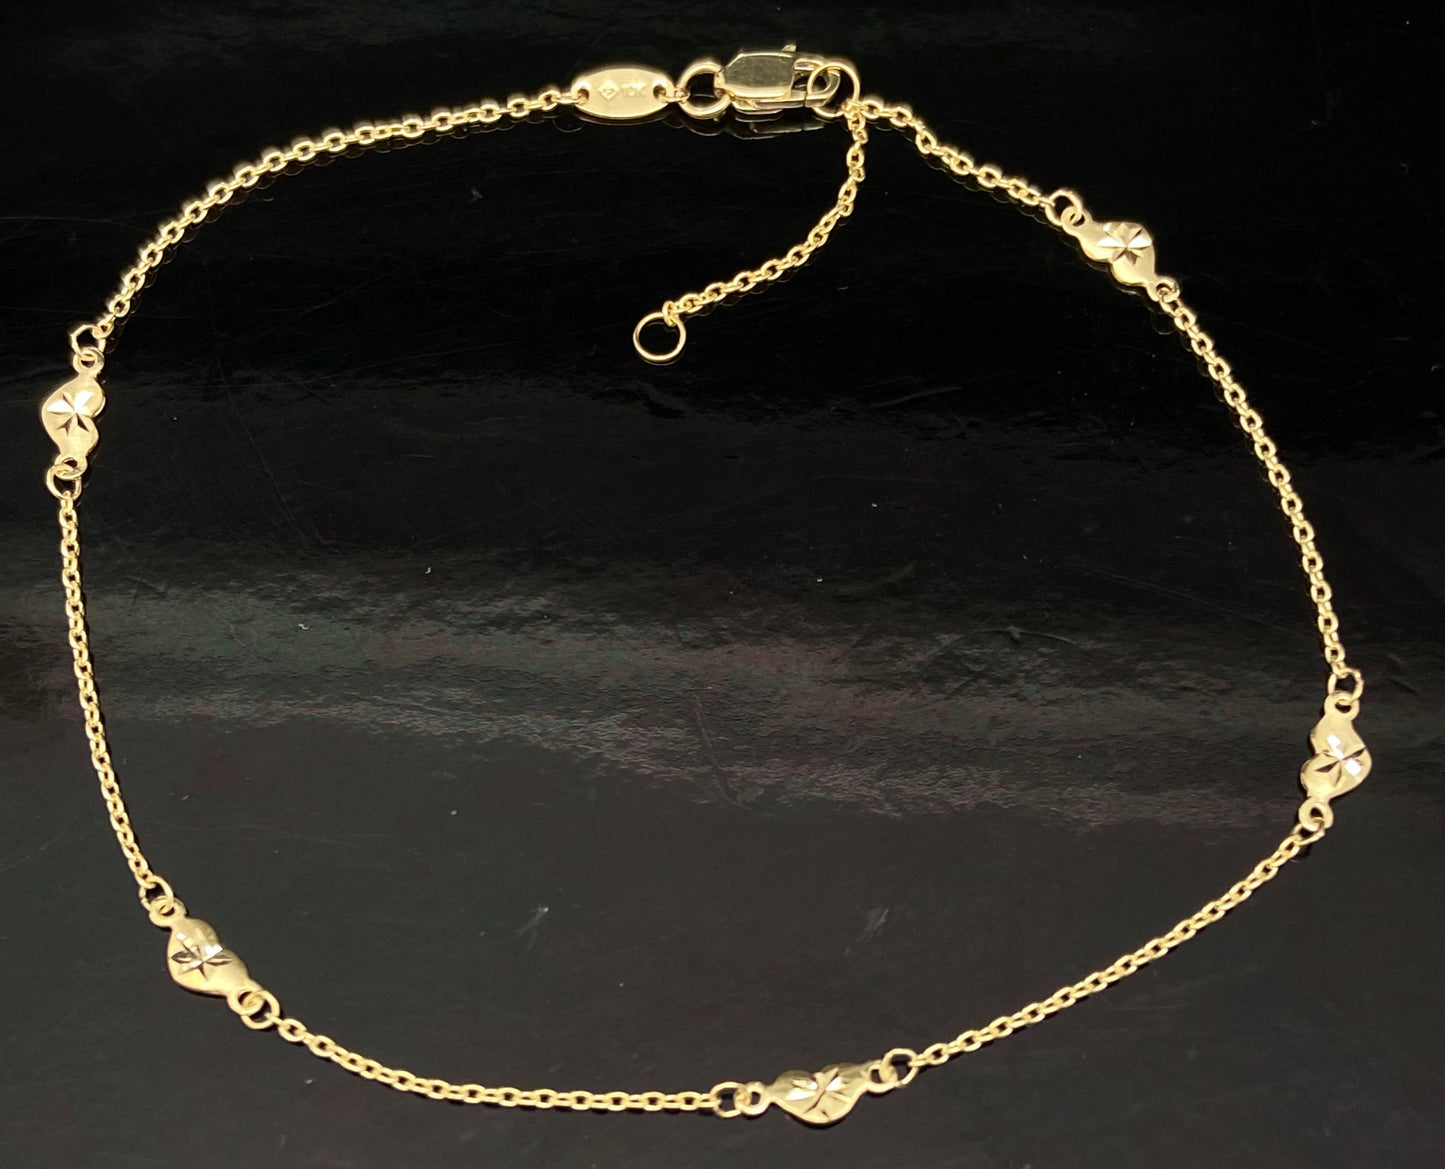 Yellow Gold Diamond-Cut Puffy Heart Station Chain Anklet Bracelet